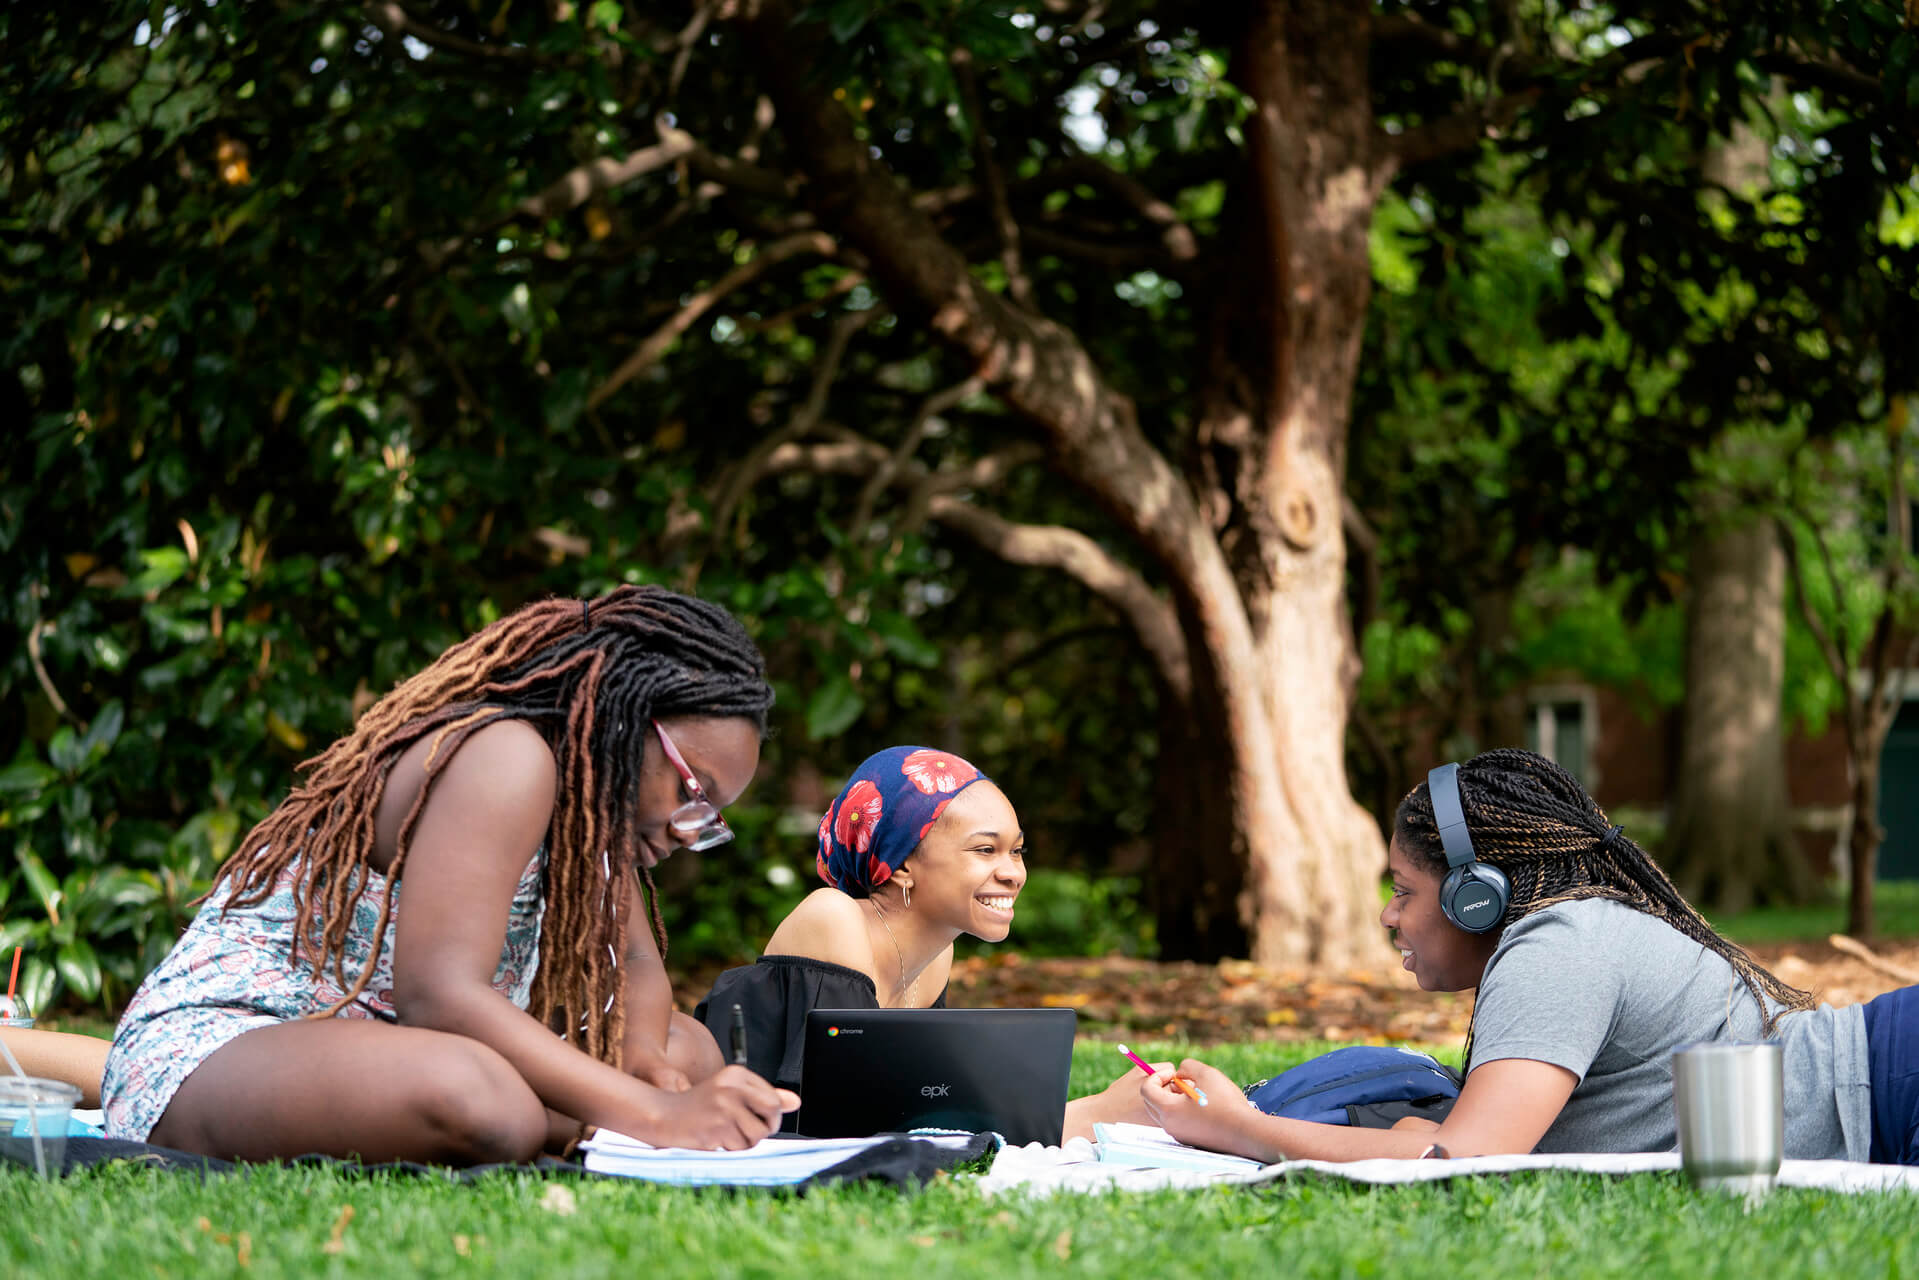 Three female students sitting in a grassy park discussing their transition from high school to college